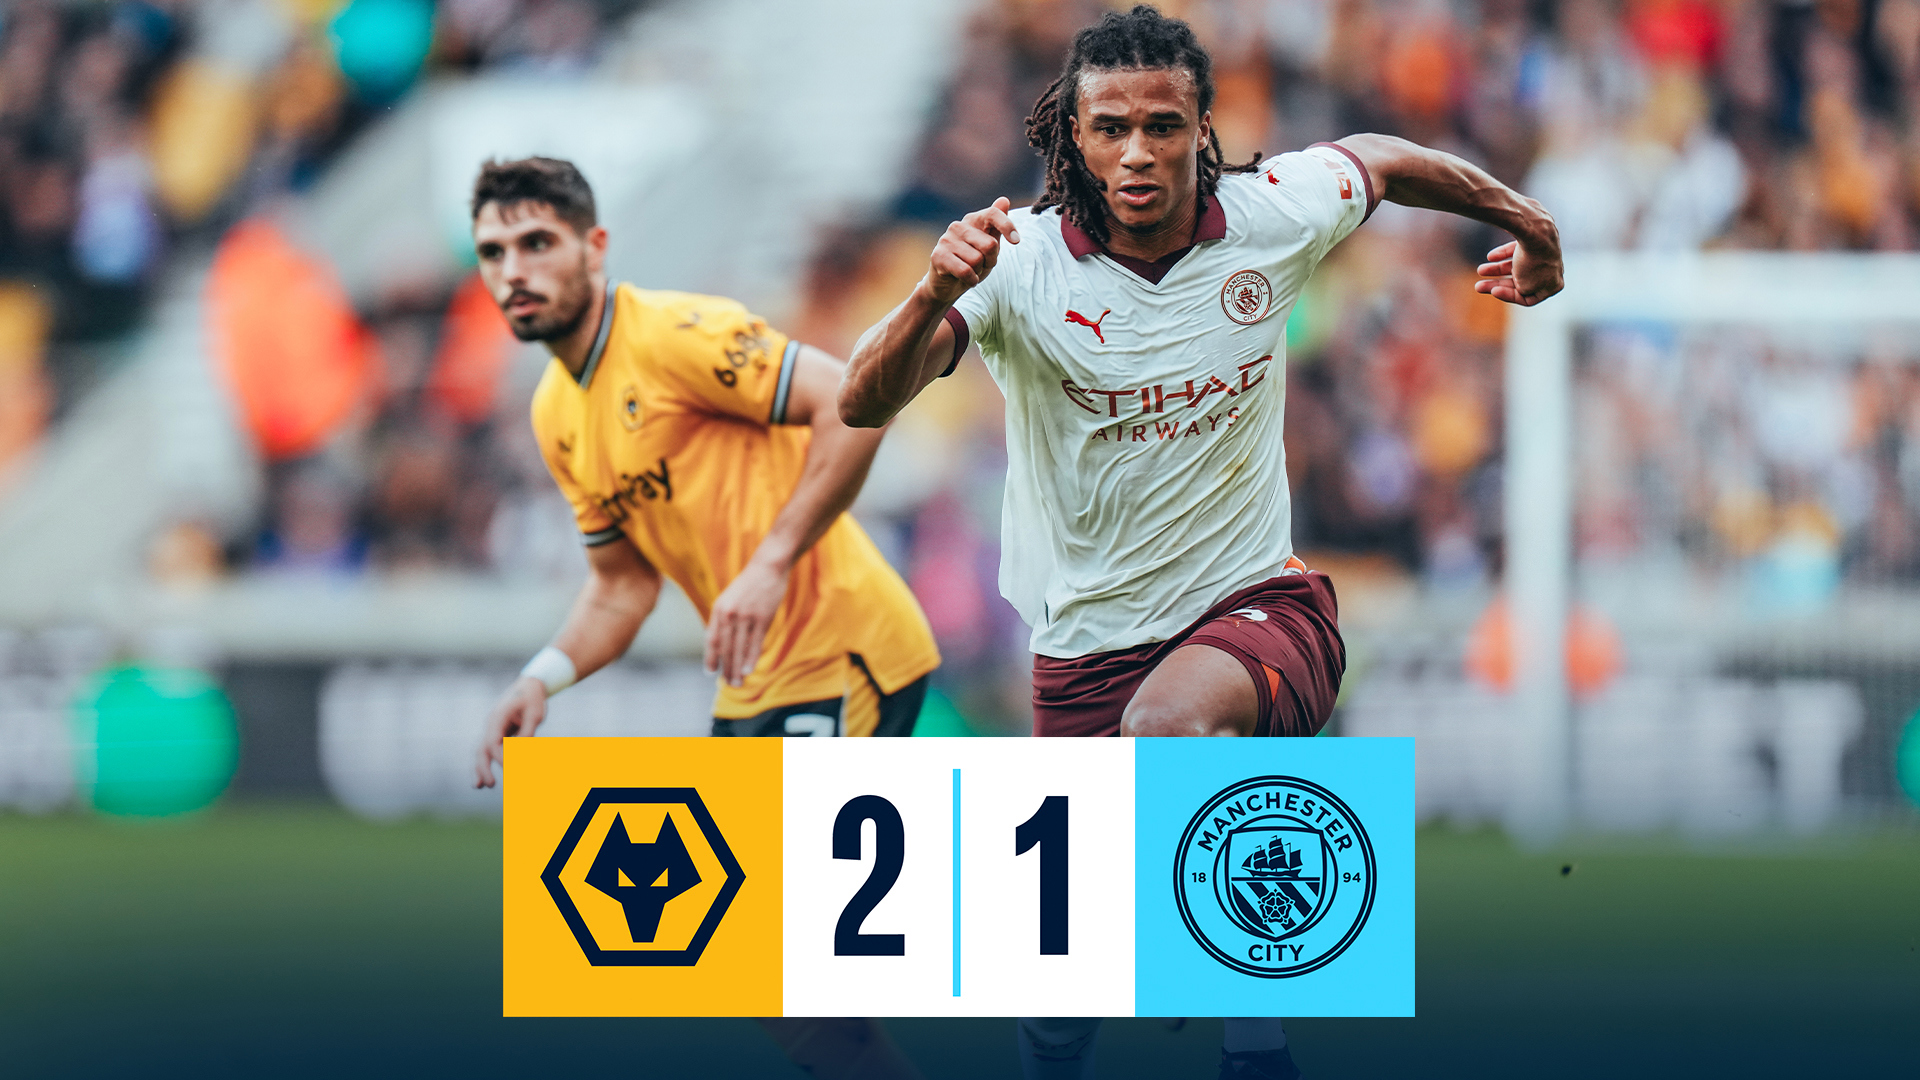 Wolves 2-1 City Brief highlights